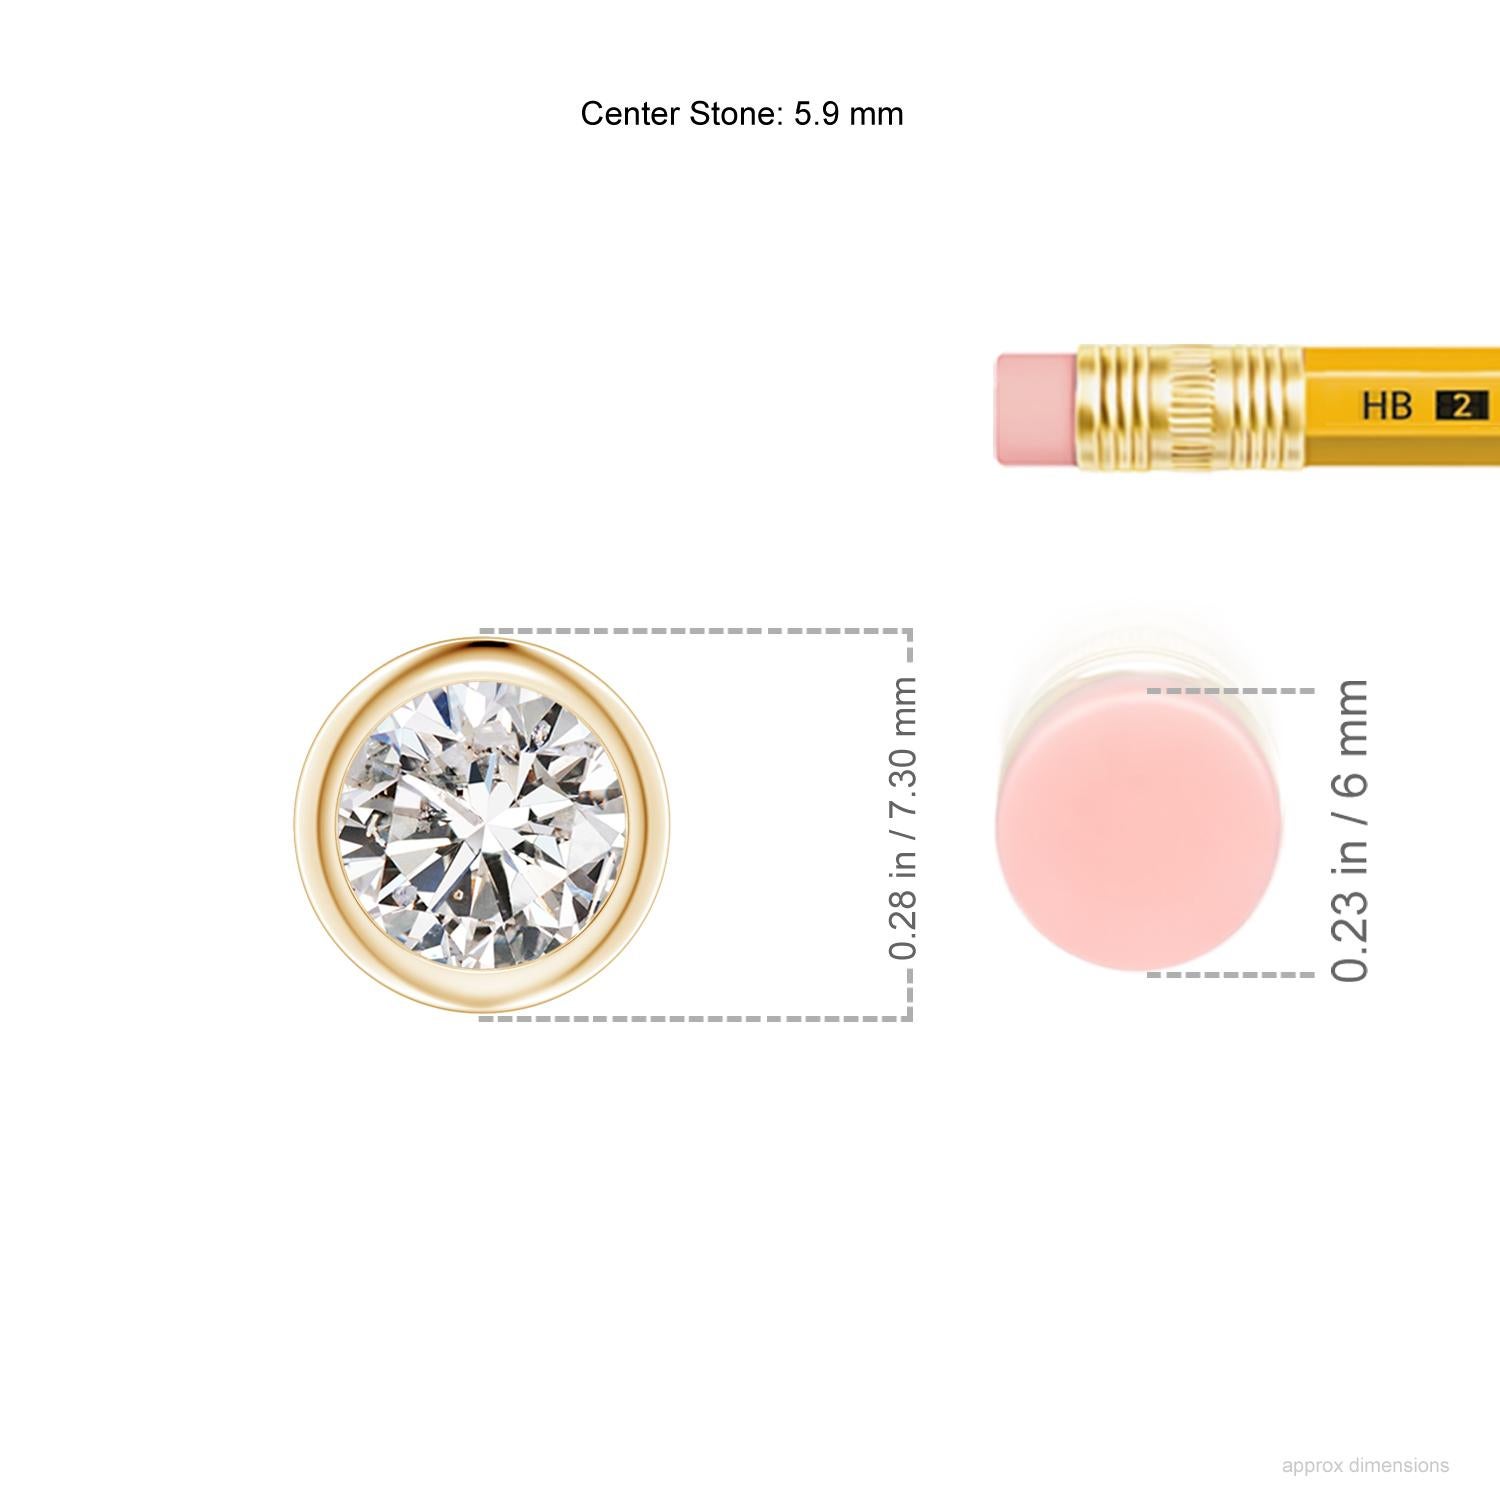 This classic solitaire diamond pendant's beautiful design makes the center stone appear like it's floating on the chain. The sparkling diamond is secured in a bezel setting. Crafted in 14k yellow gold, this round diamond pendant makes an elegant